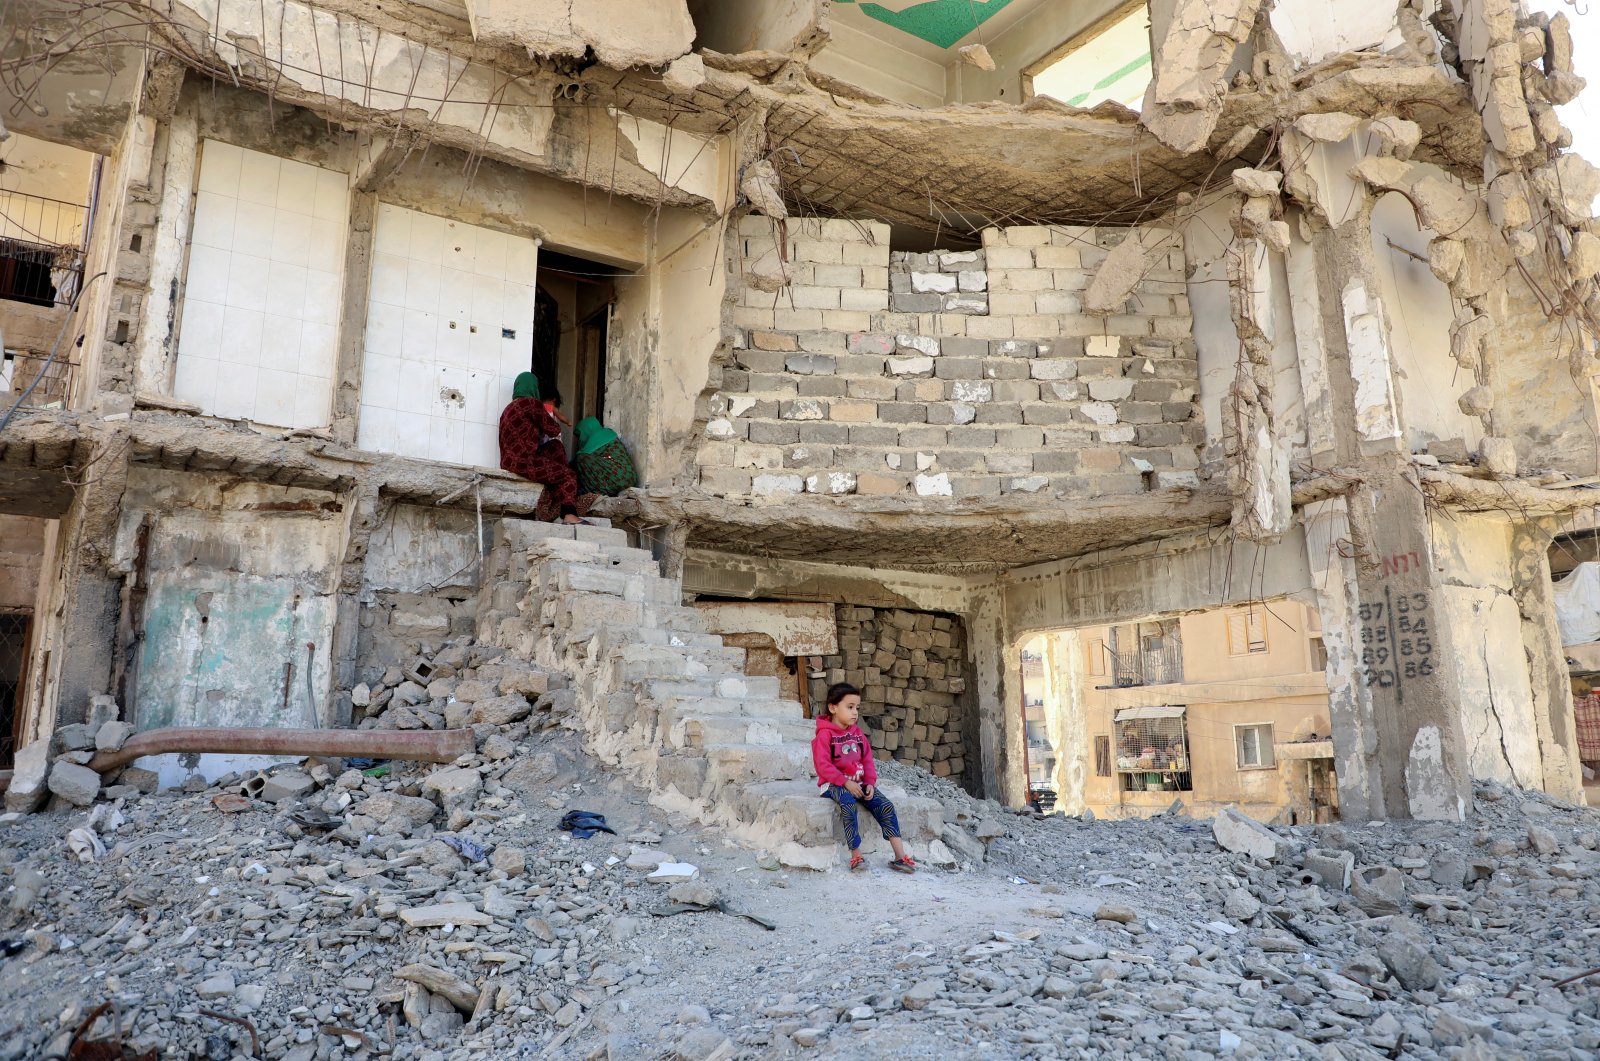 People sit in a damaged building in Raqqa, Syria, Oct.12, 2022. (Reuters Photo)